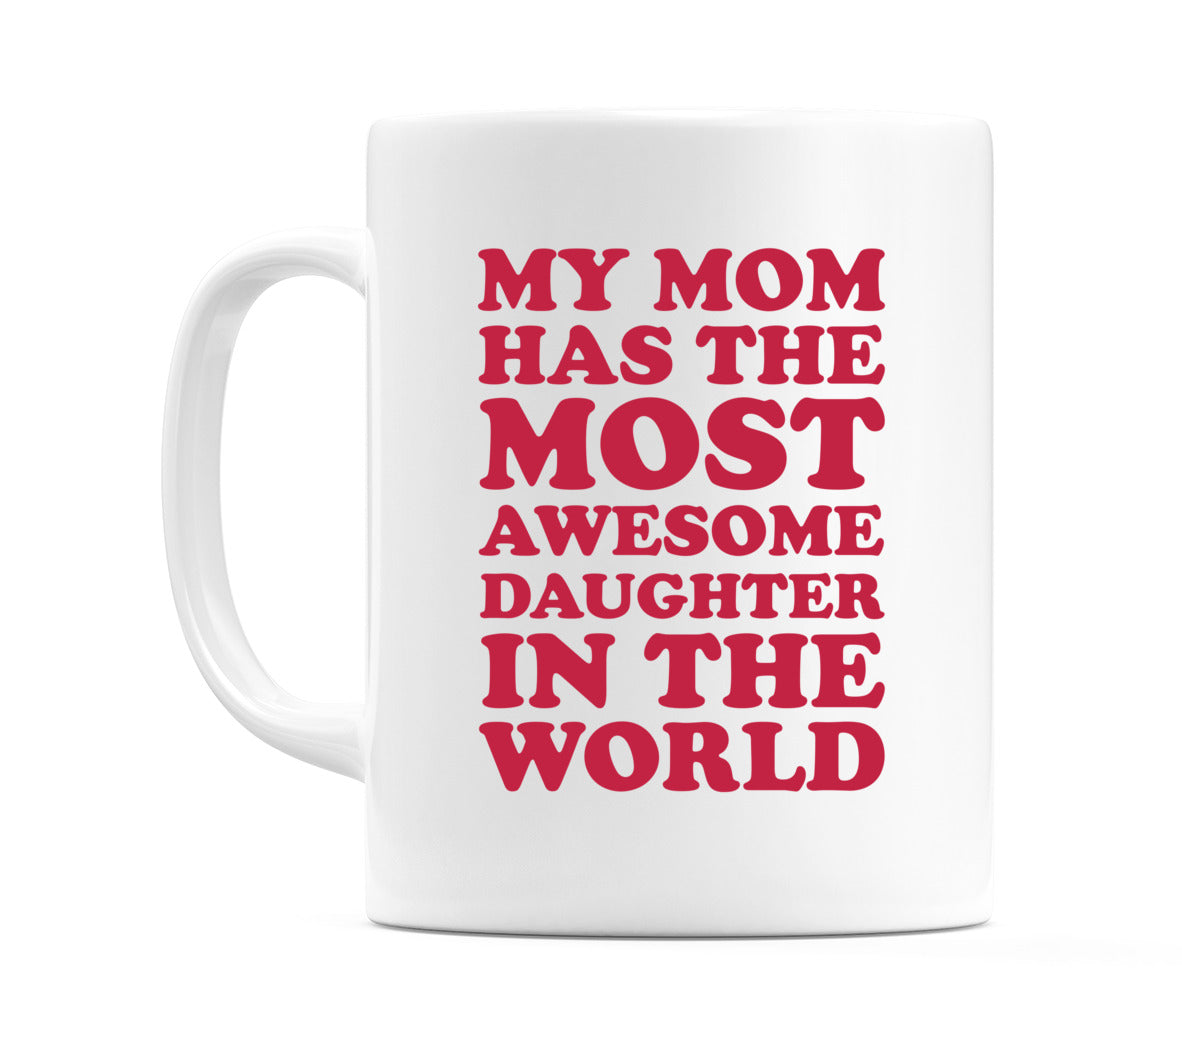 My Mom Has The Most Awesome Daughter In The World Mug